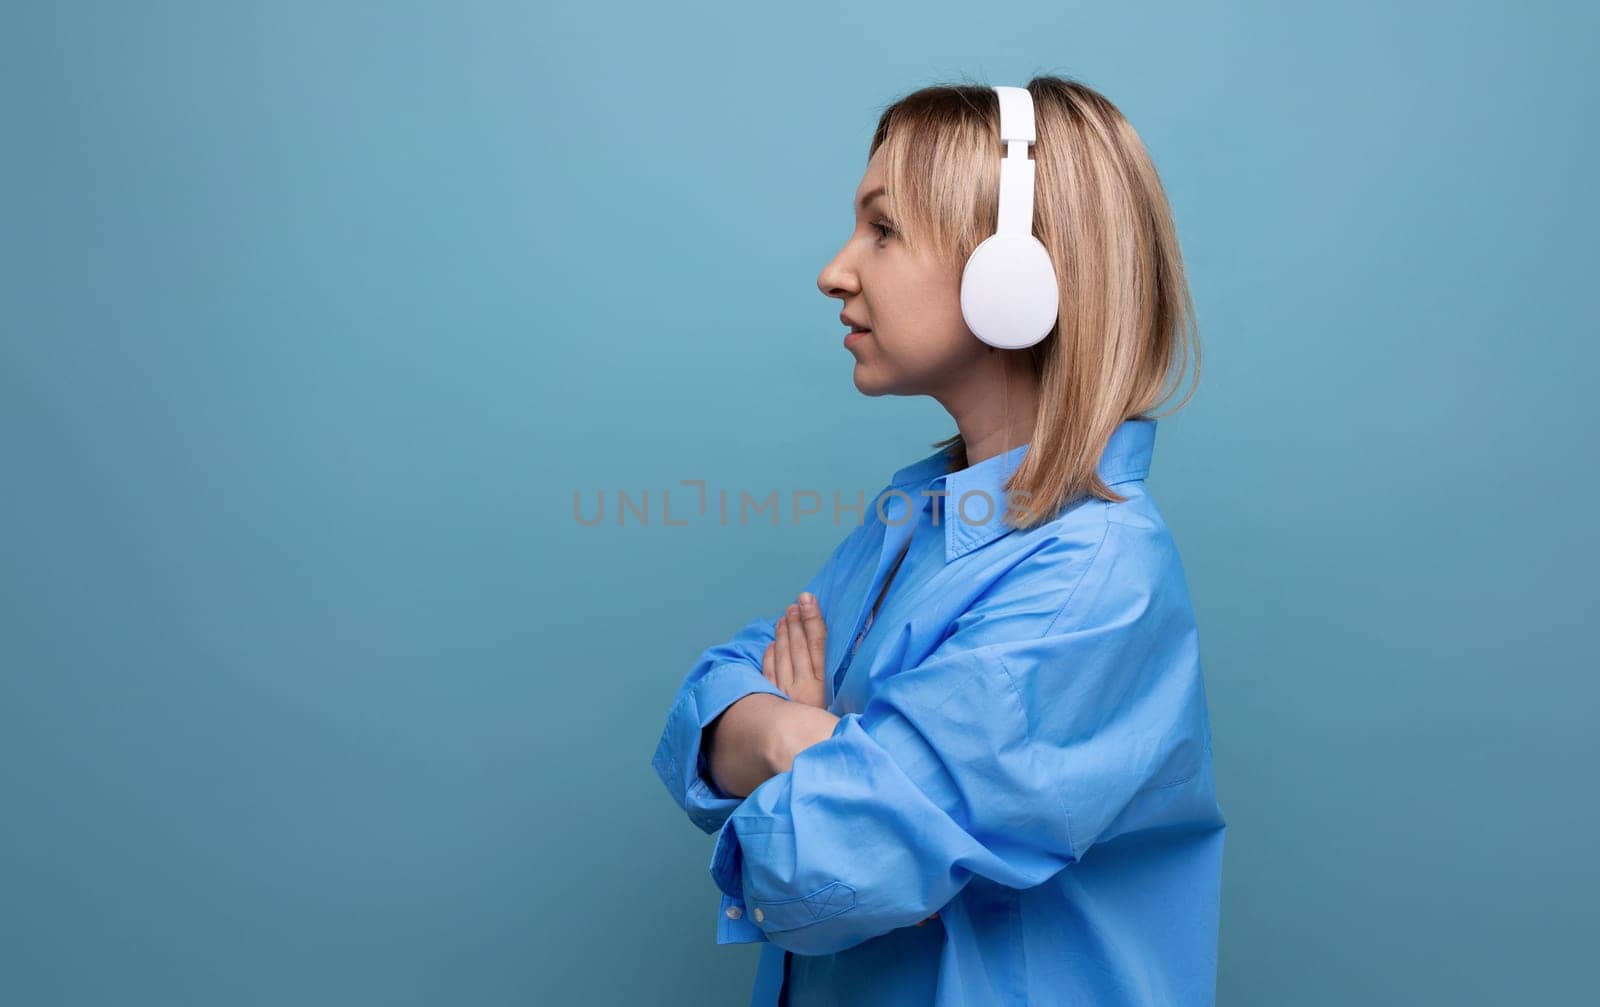 horizontal profile photo of an adorable young woman in a casual shirt focused on sound in large white headphones on a blue isolated background with copy space.